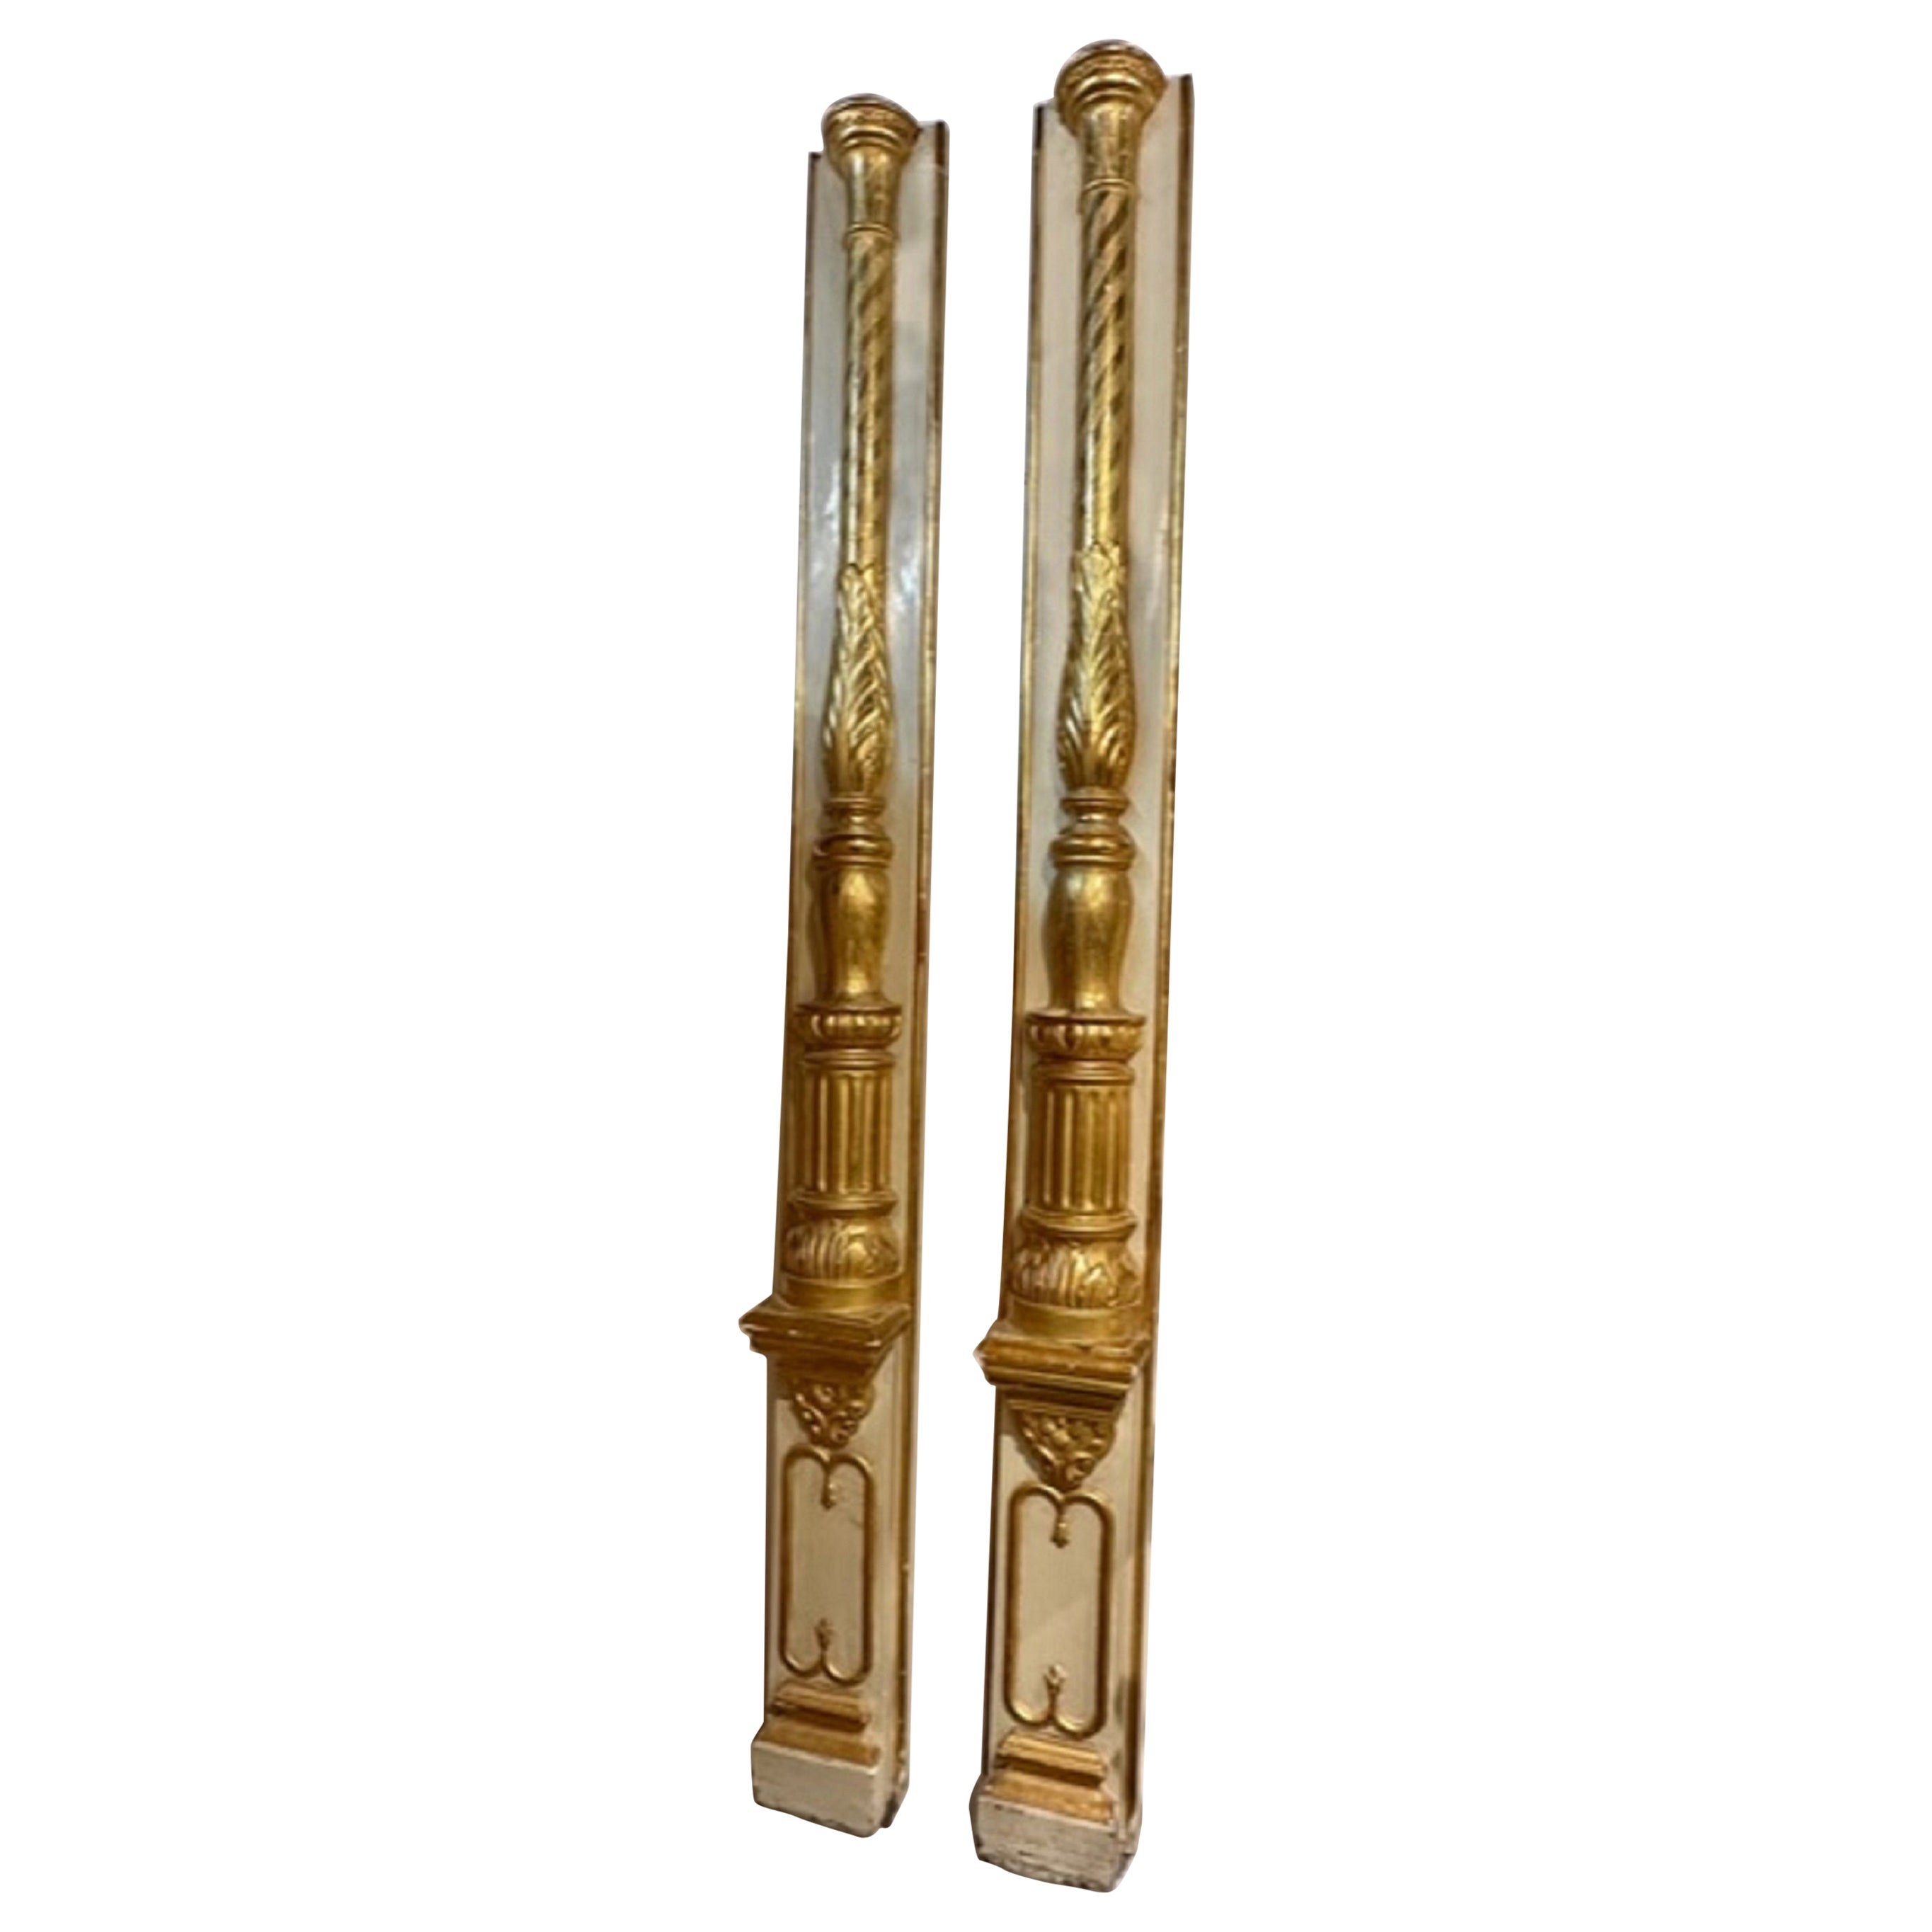 Pair of 19th Century Italian Carved and Parcel Gilt Columns